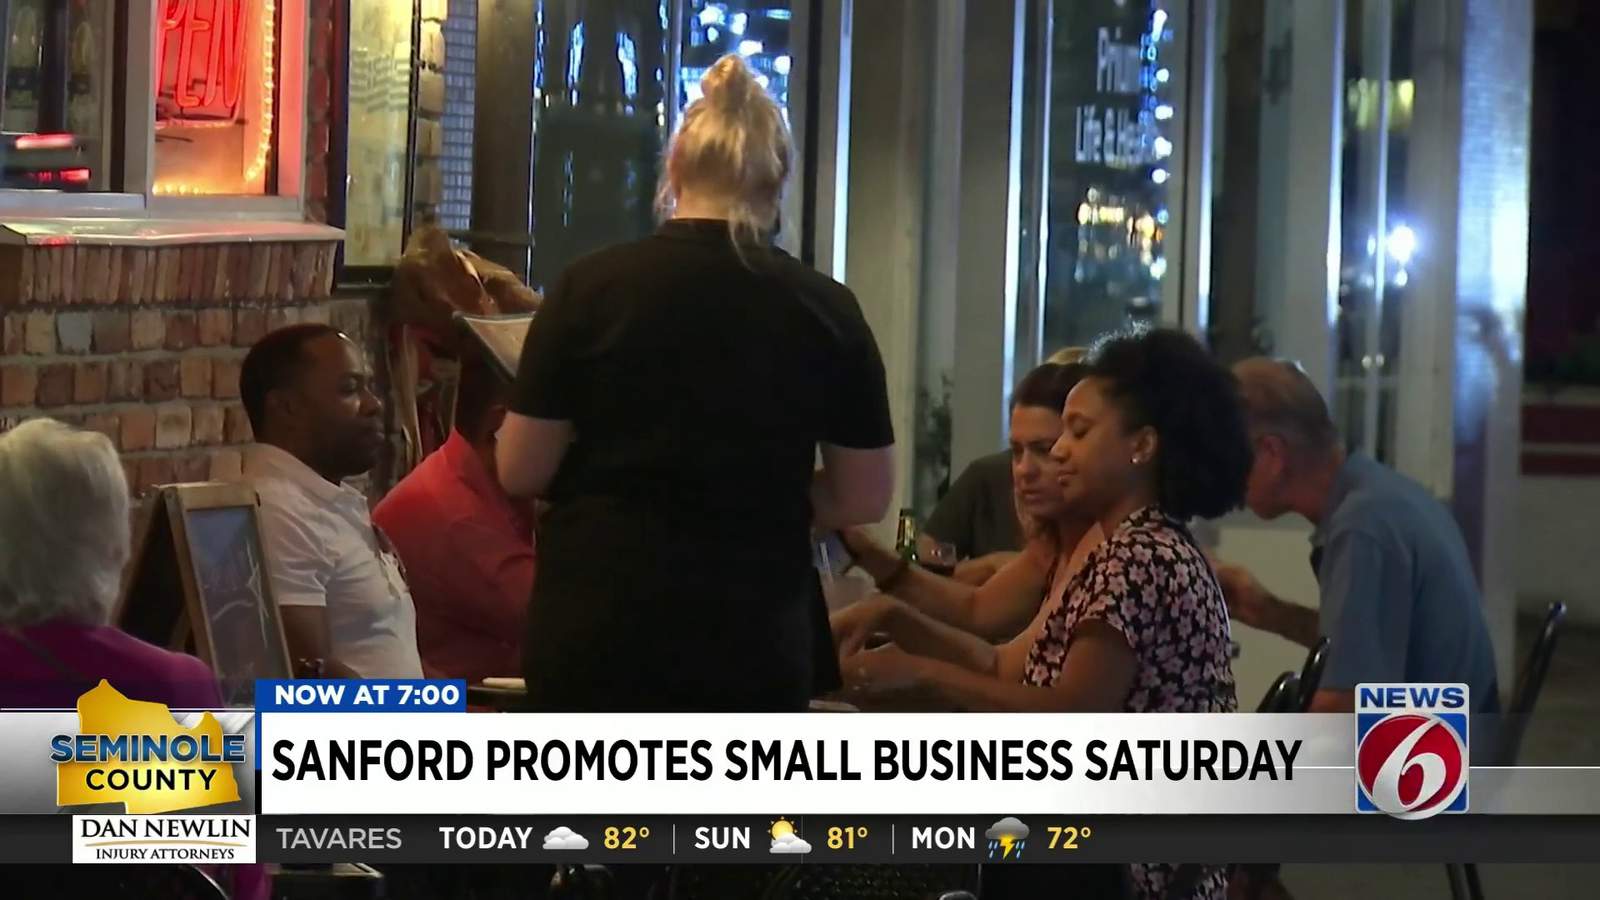 Thousands turn out for open container event in Sanford for Small Business Saturday